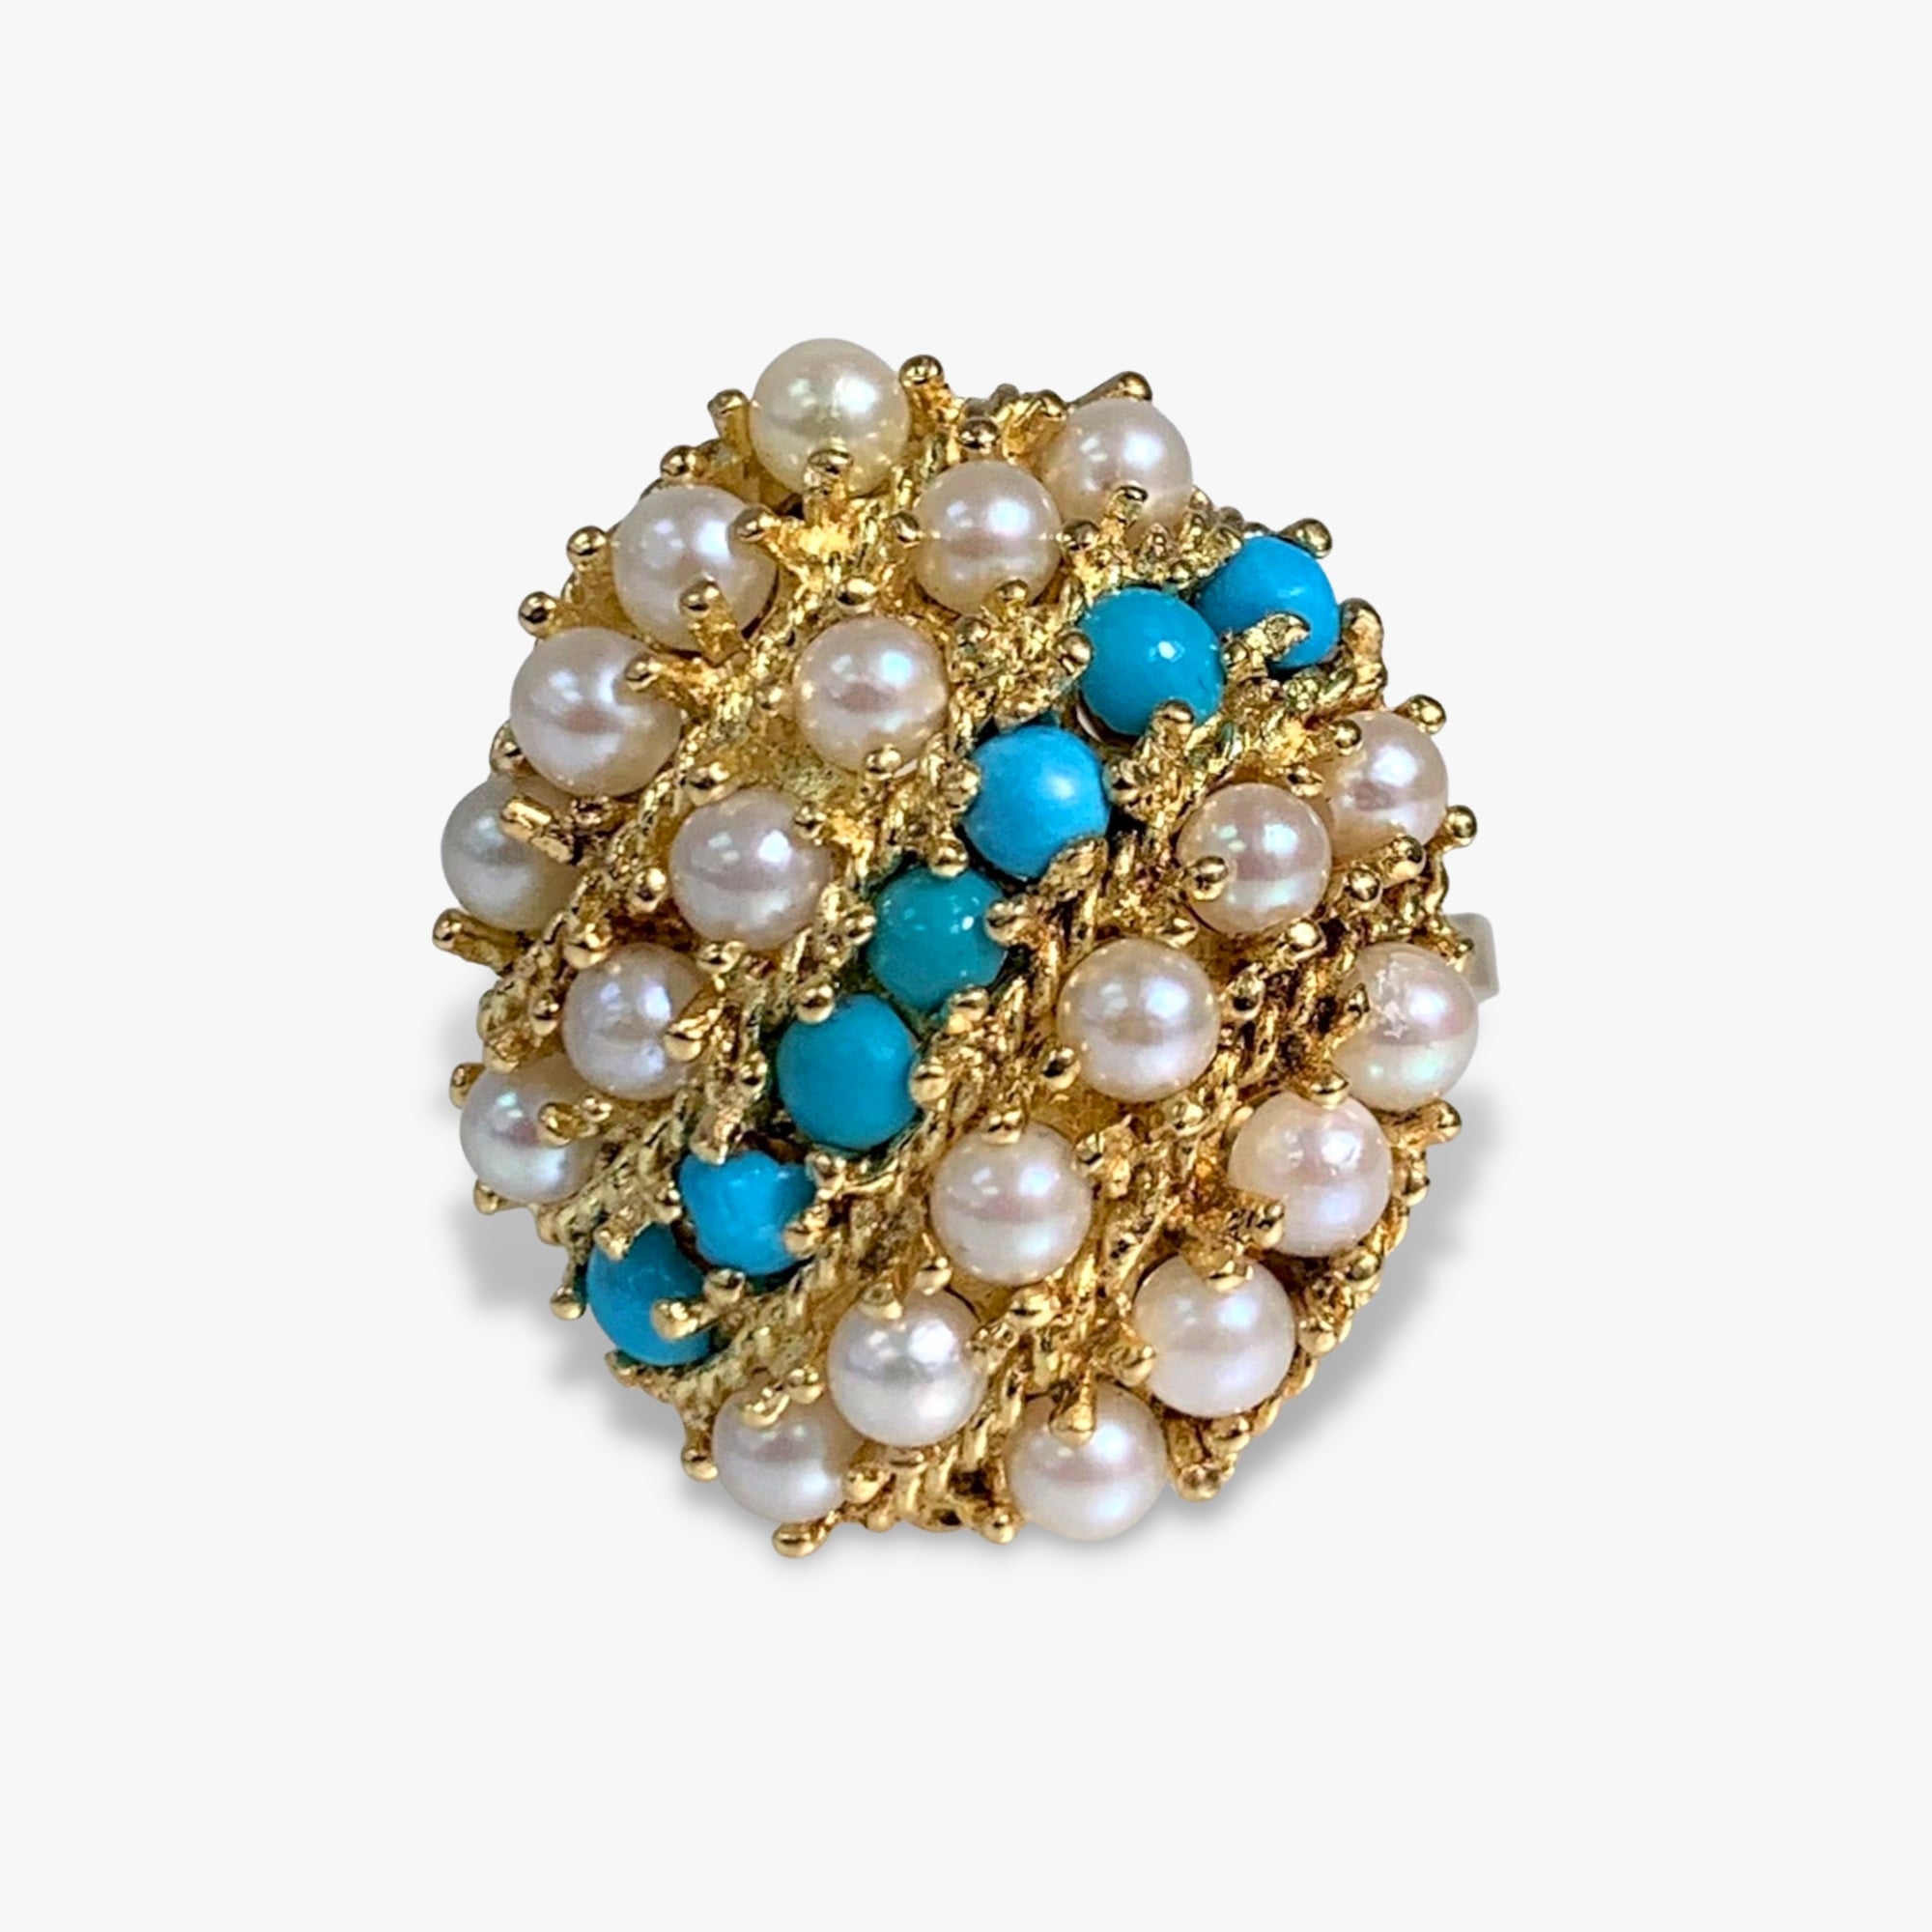 14k Yellow Gold Pearl and Turquoise Vintage Ring